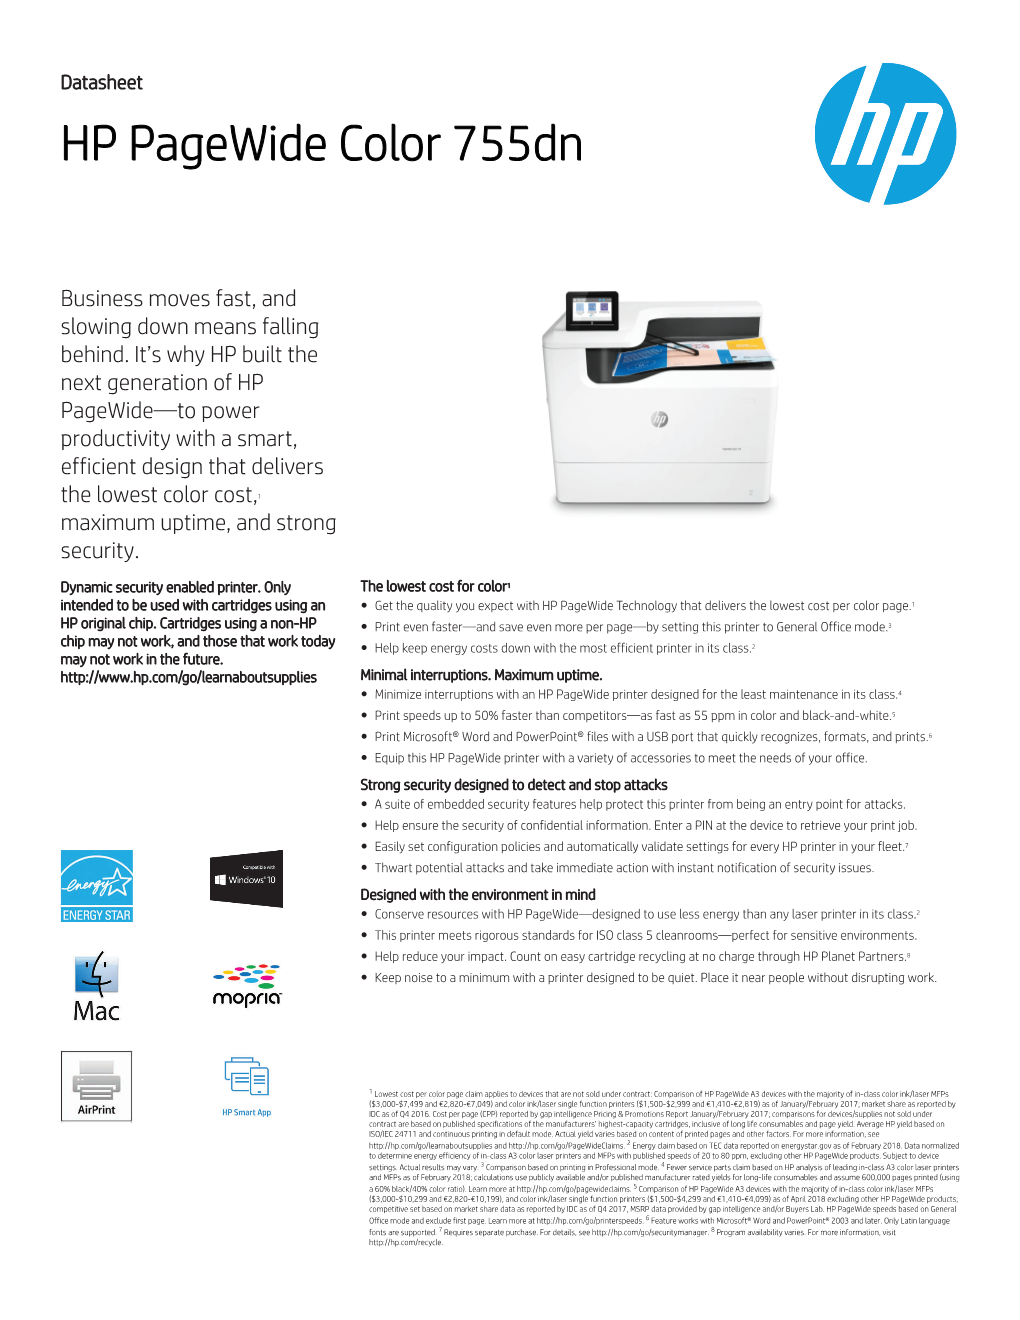 HP Pagewide Color 755Dn